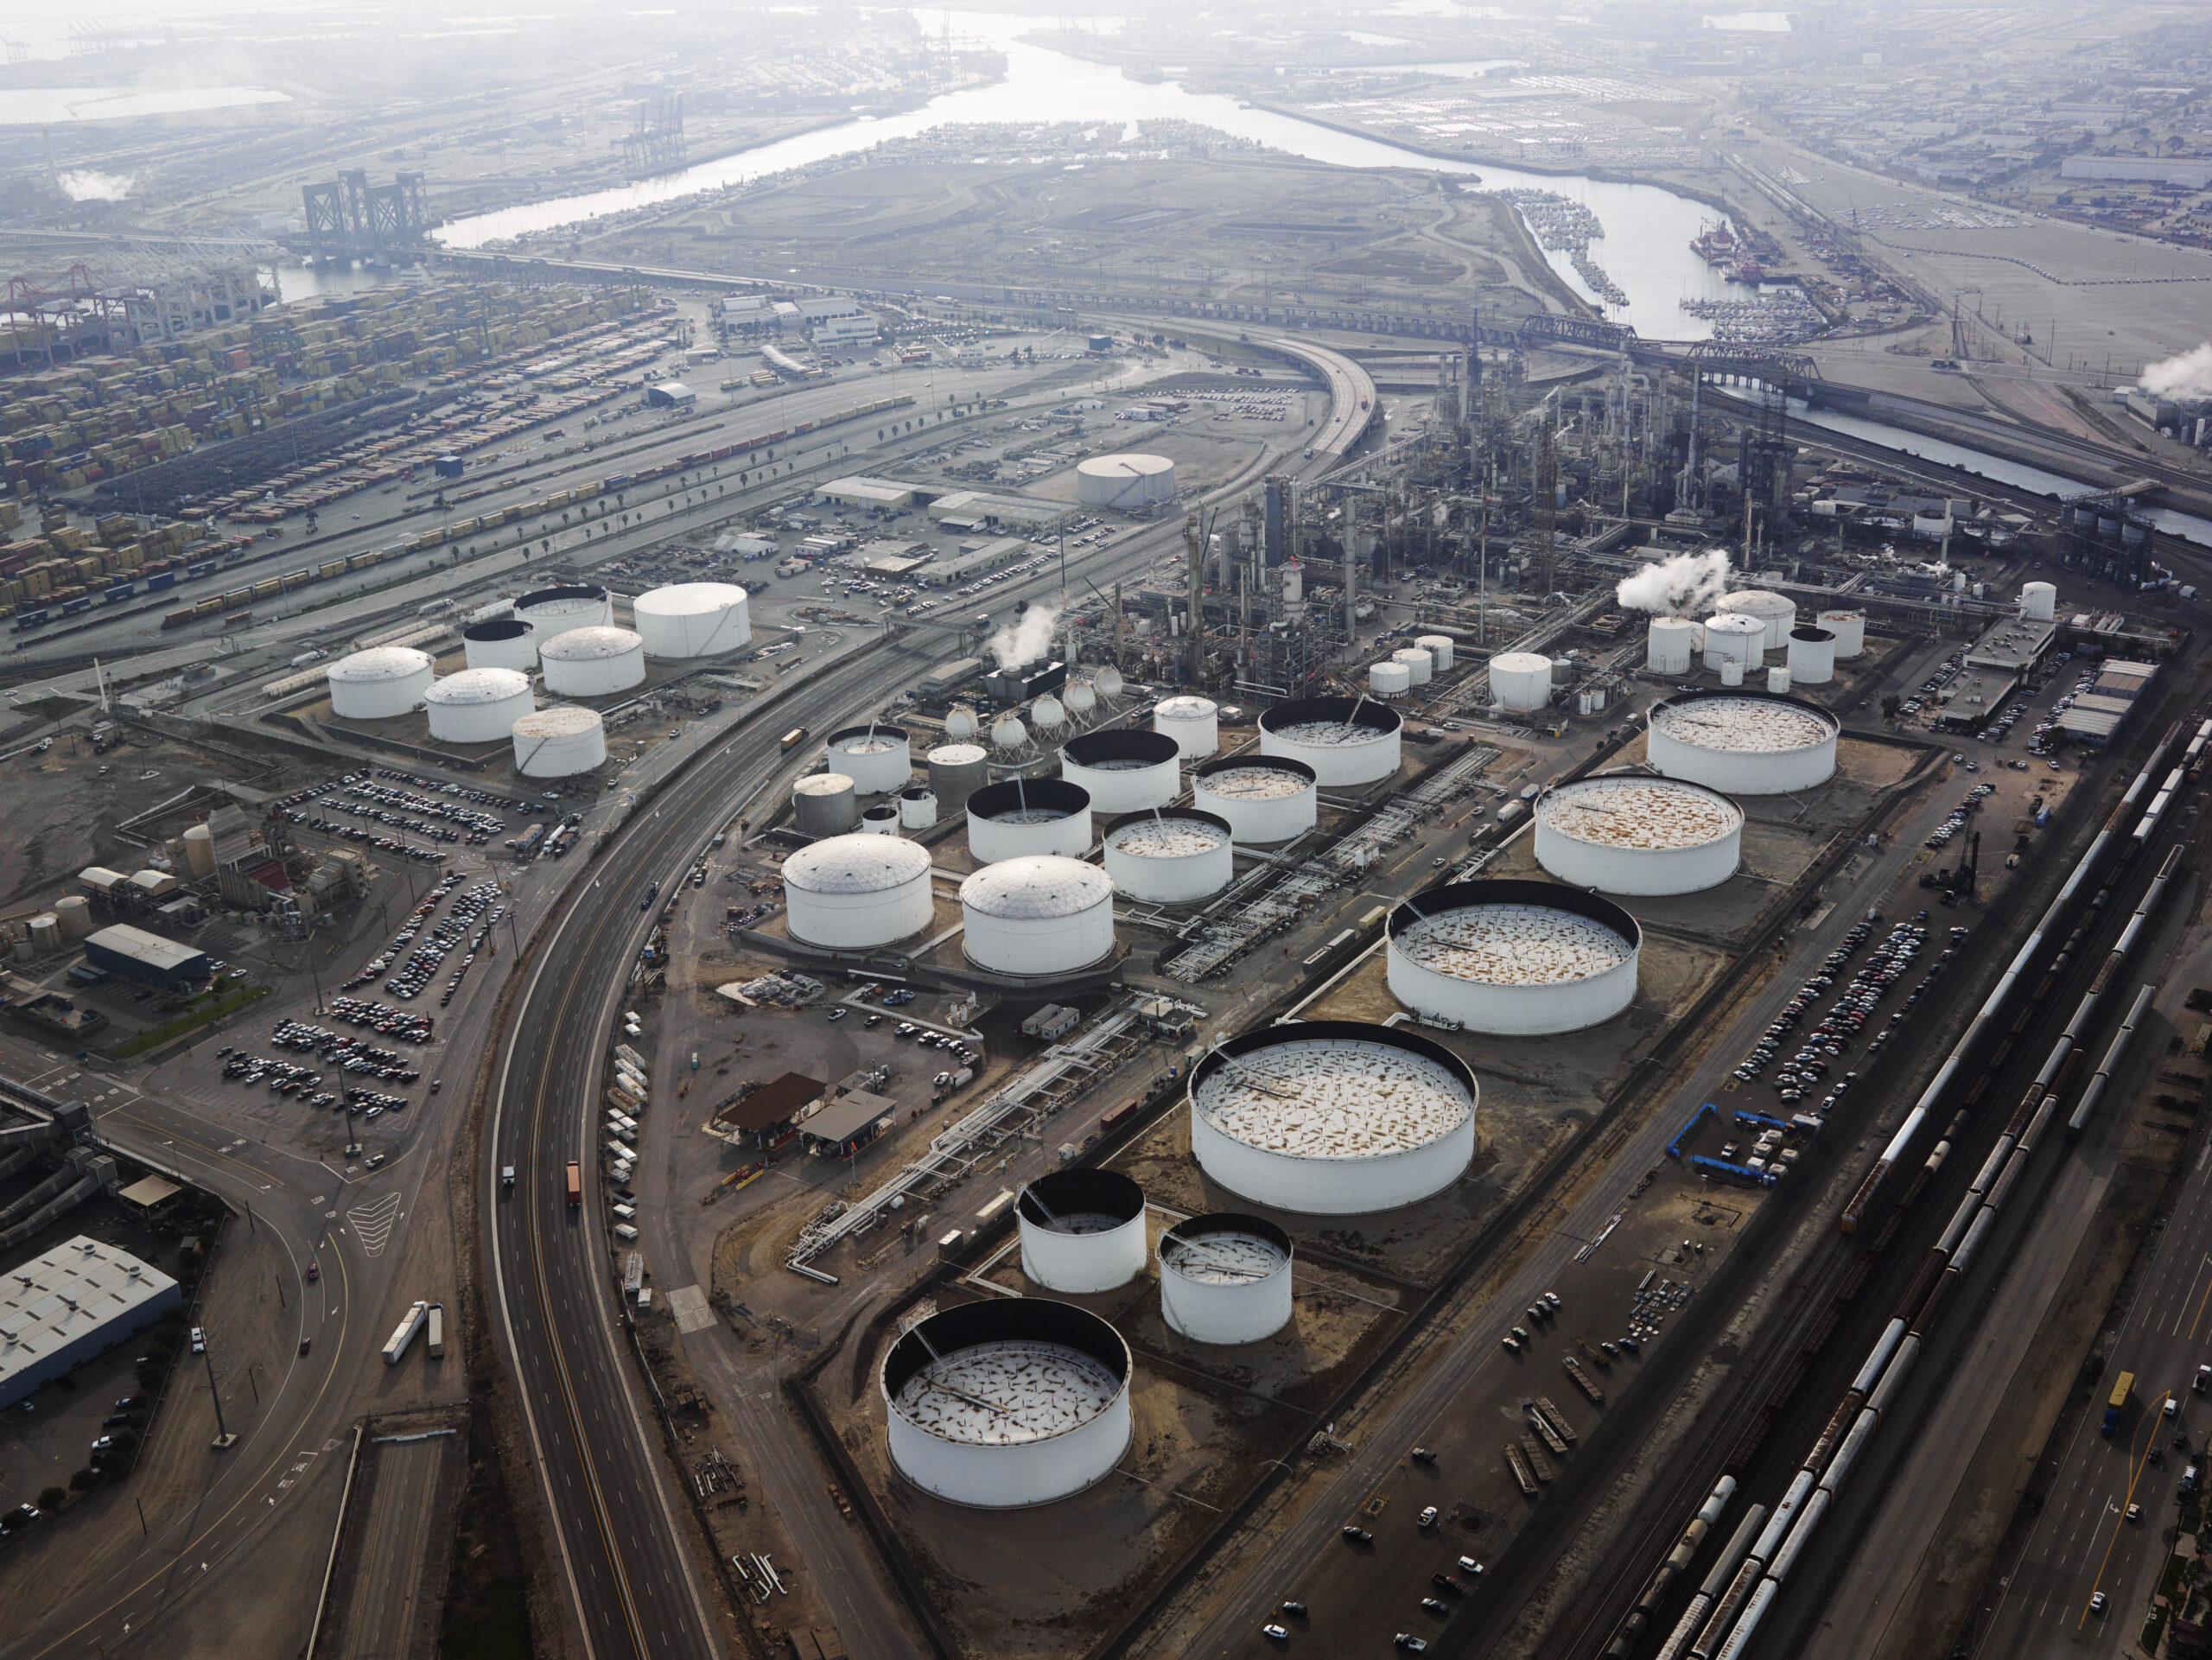 A bird's eye view of white tanks containing gasoline at a refinery.